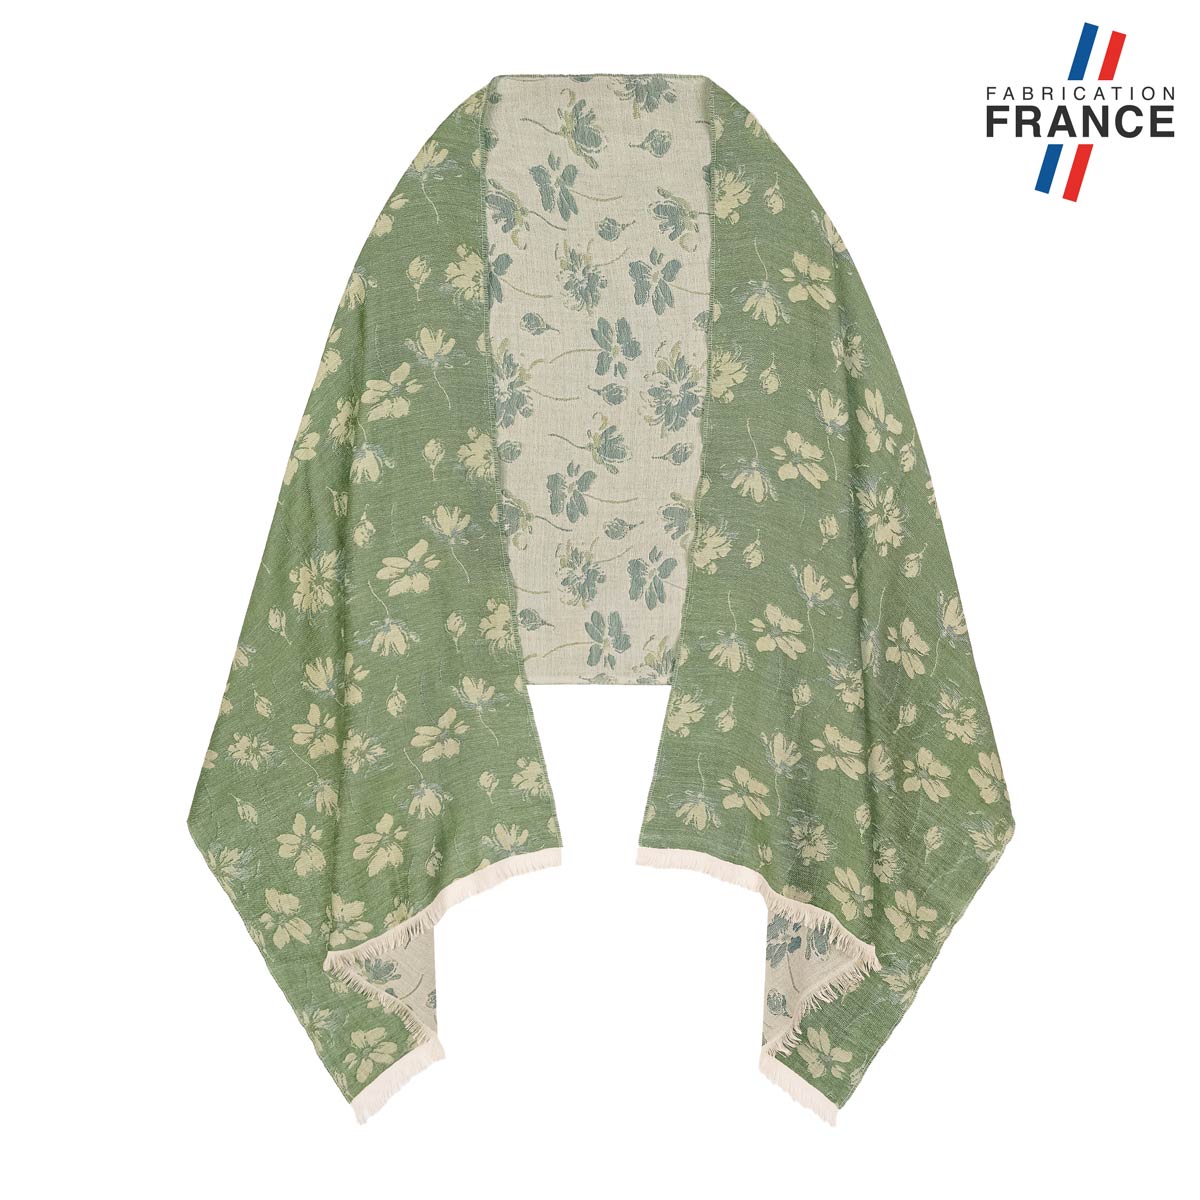 AT-06963_F12-1FR_Chale-florale-liberty-verte-laine-merinos-made-in-France